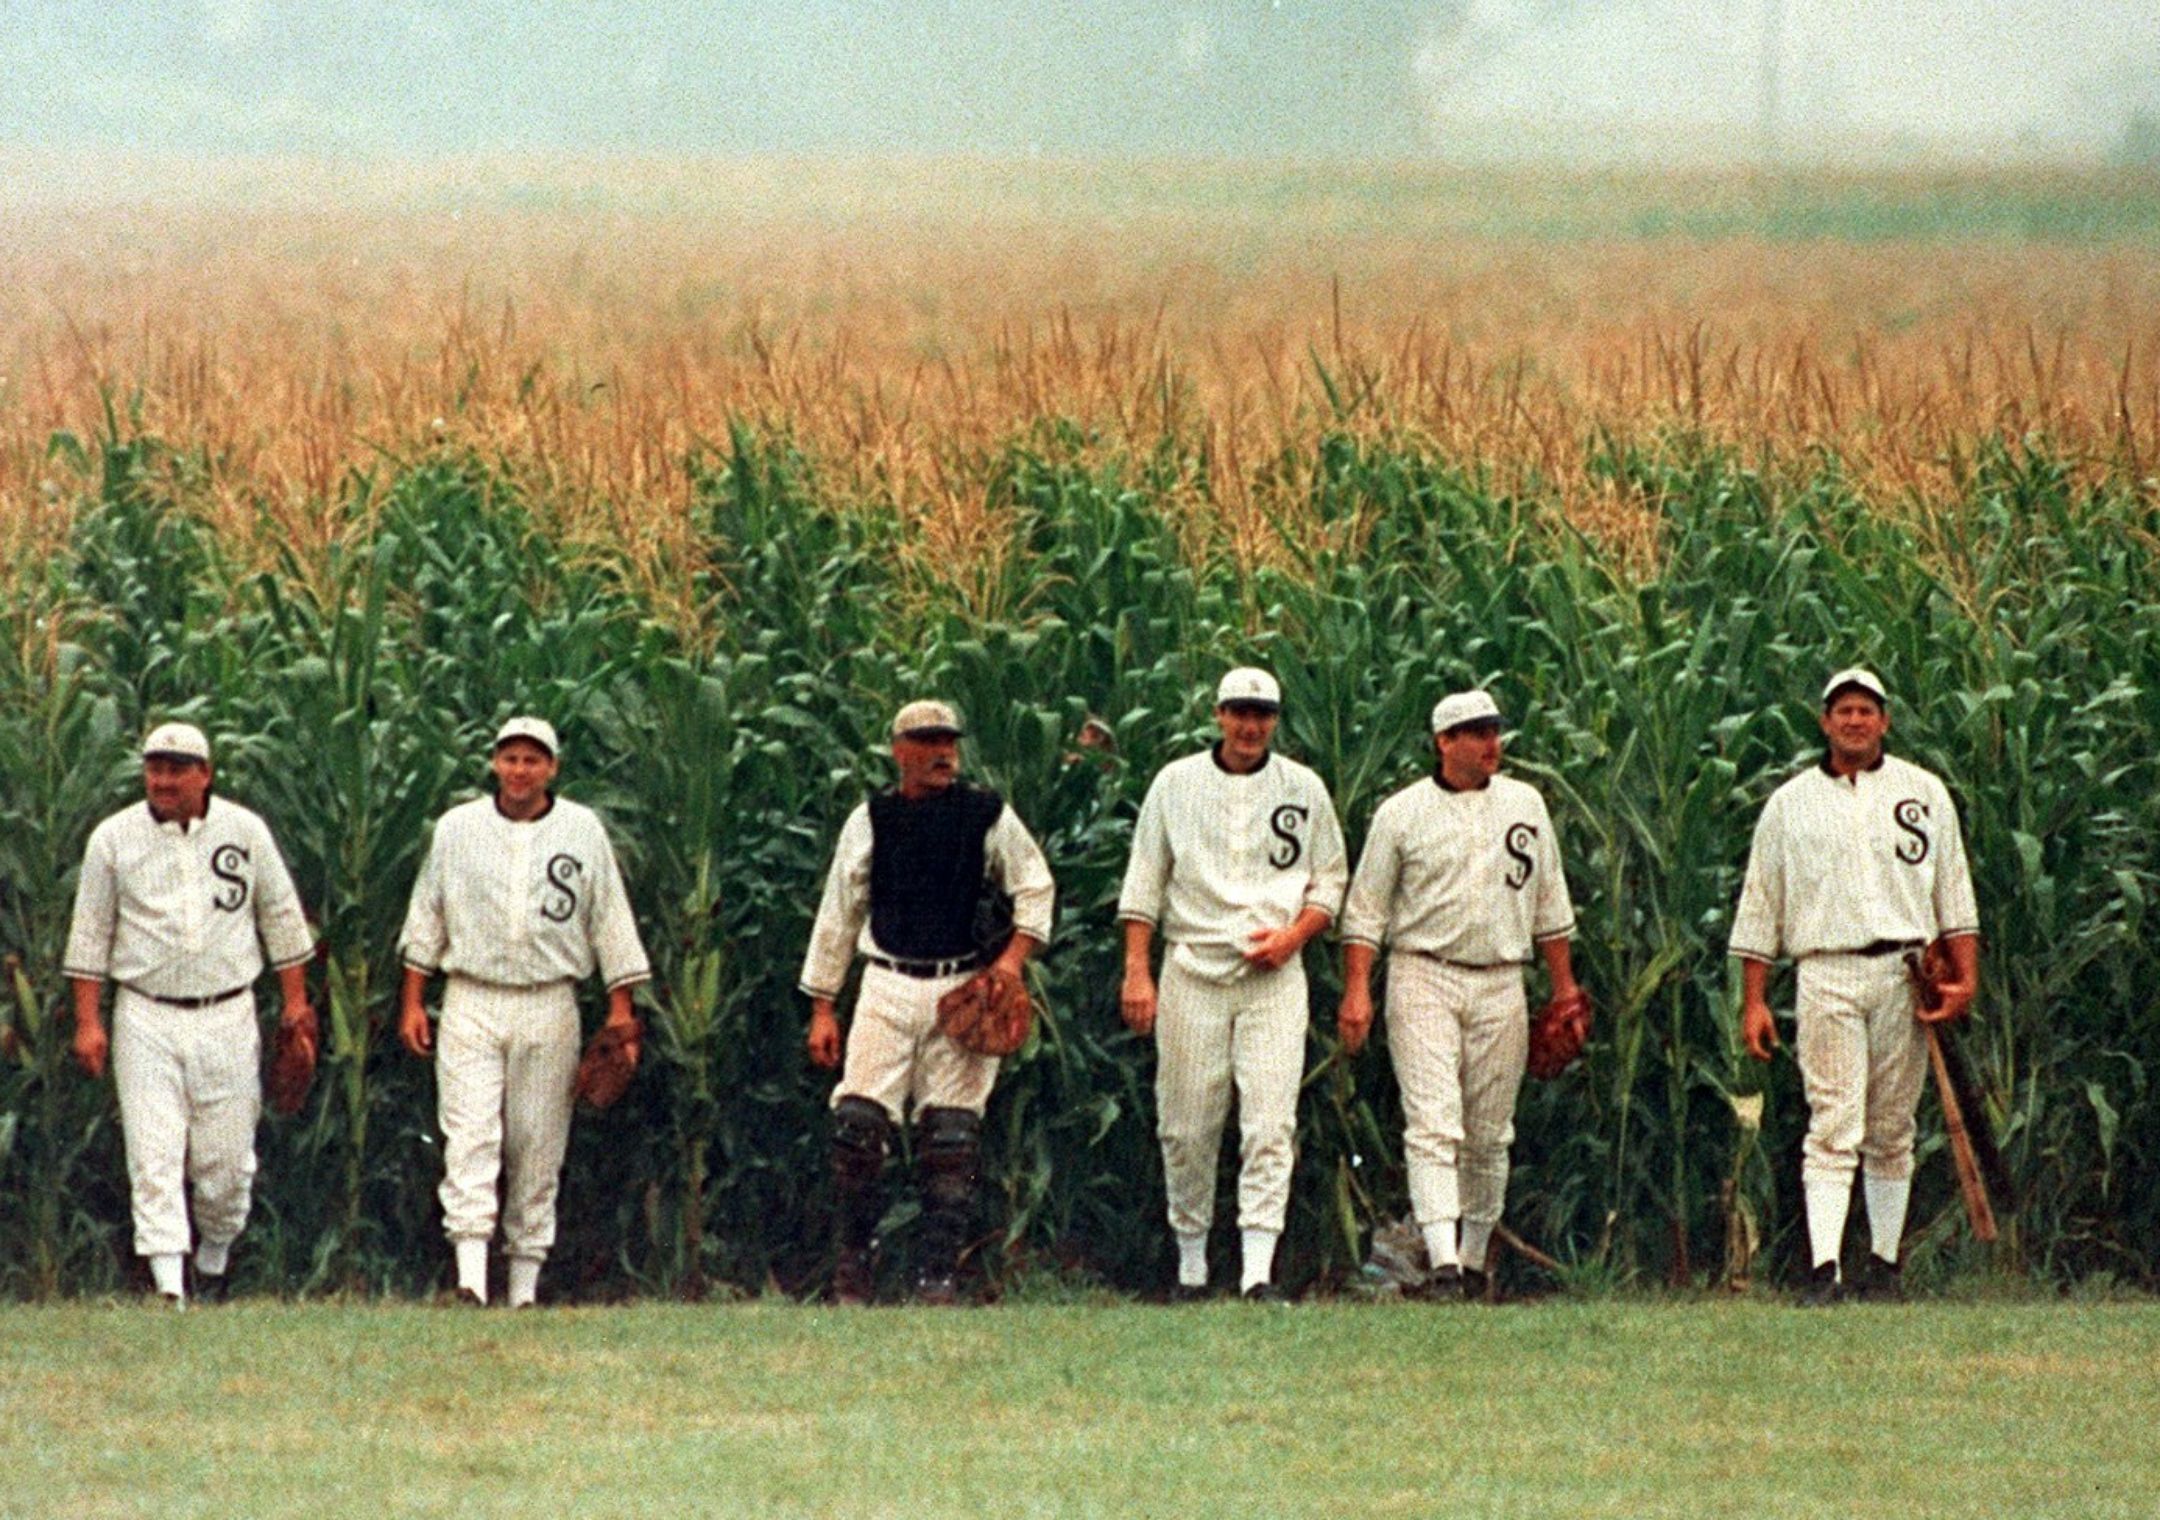 Is Your Website A Field Of Dreams?